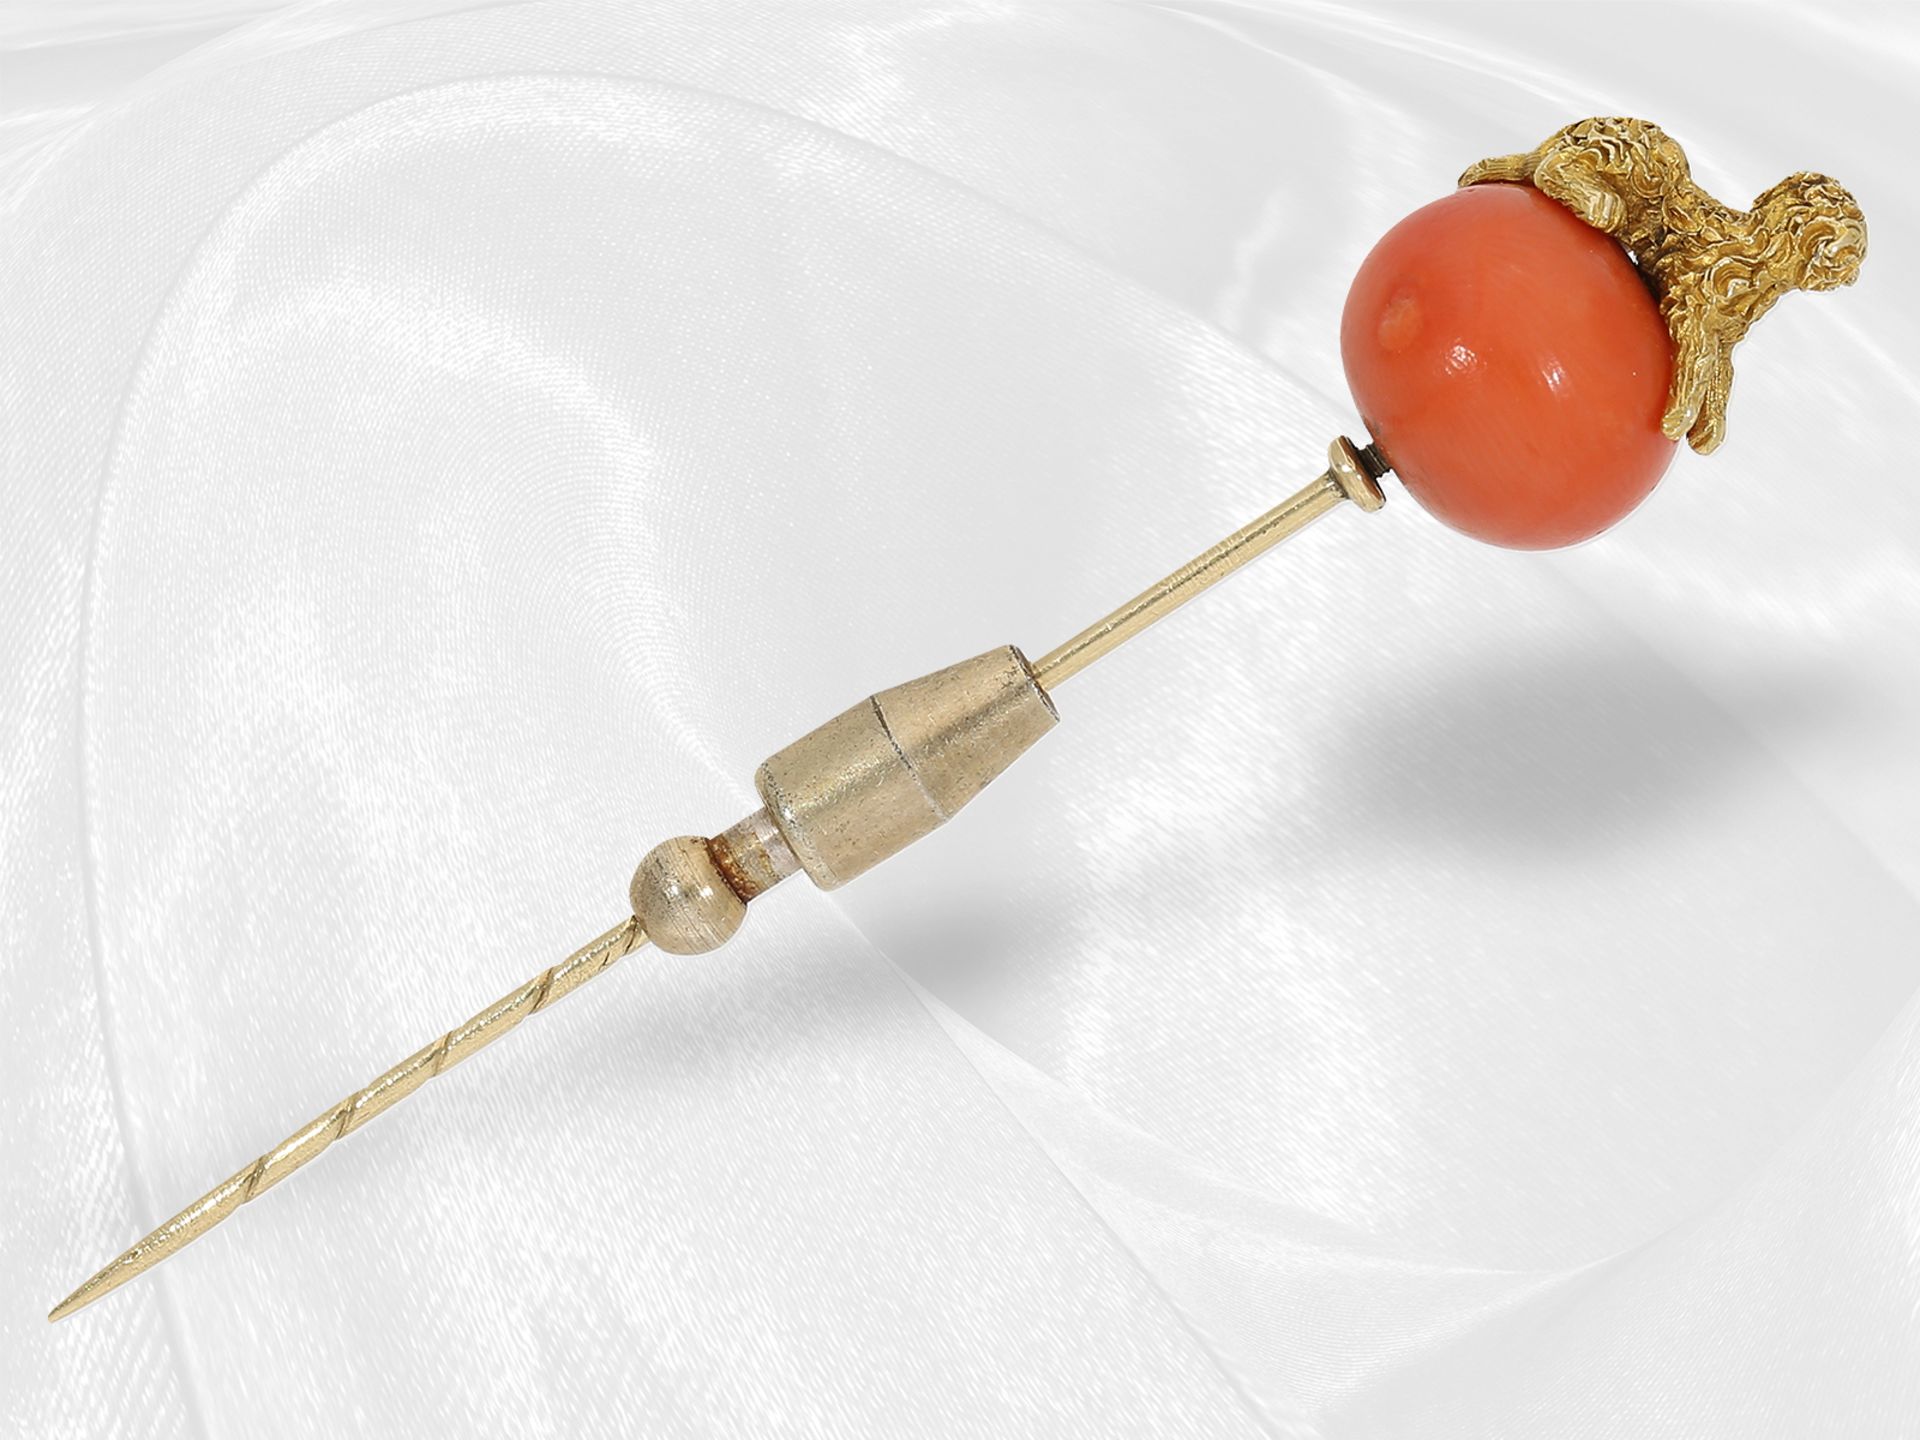 Pendant/Brooch/Comb: Collection of rare antique coral jewellery, around 1900 - Image 2 of 7